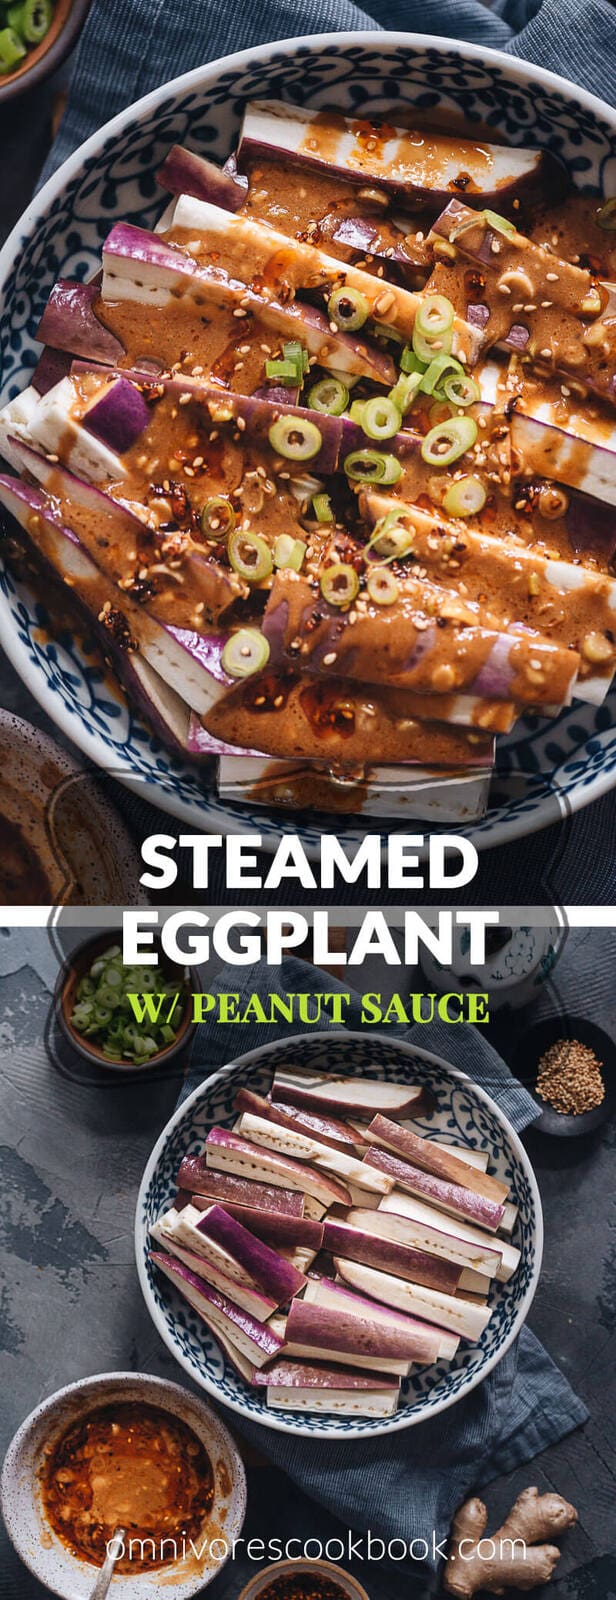 Steamed Eggplant in Nutty Sauce - Tender steamed eggplant is smothered in a gingery garlicky nutty sauce that is slightly sour and sweet. The dish takes no time to prepare, is addictively delicious, and so healthy. {Gluten-Free adaptable, Vegan} 